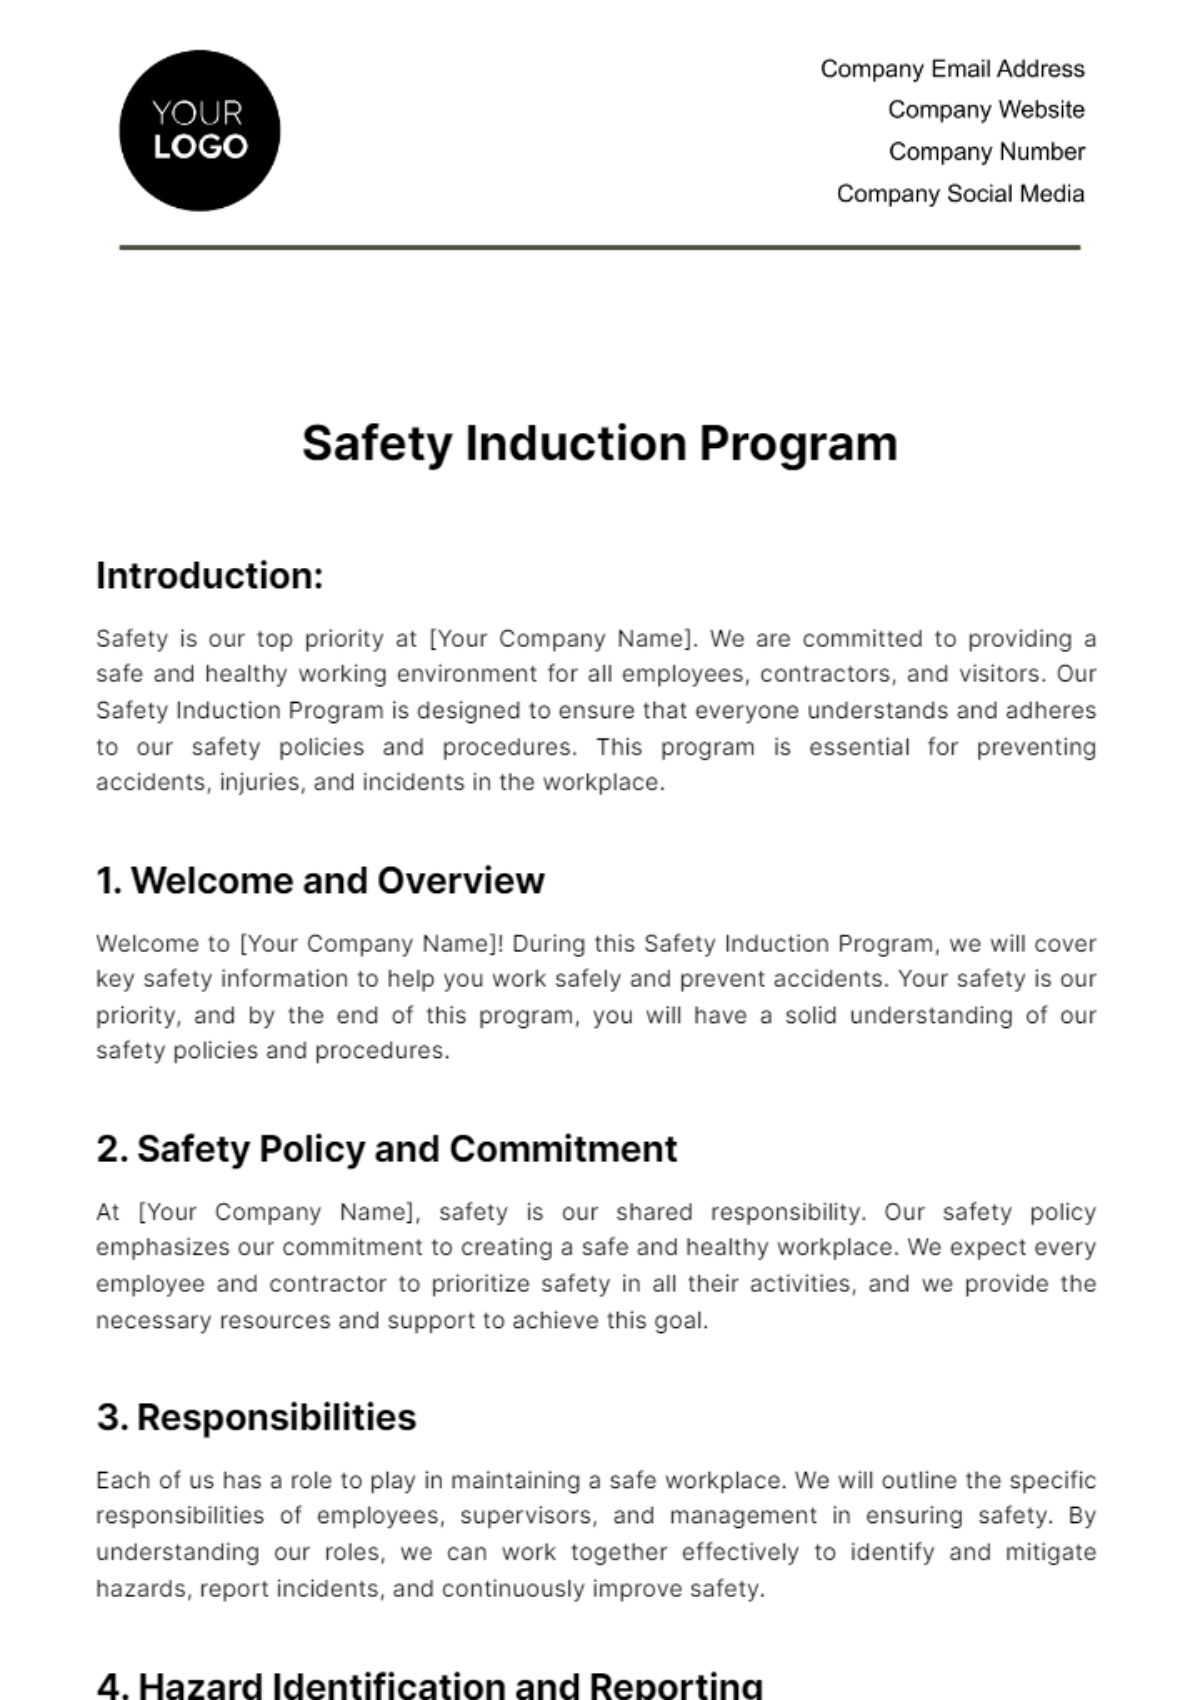 Free Safety Induction Program HR Template